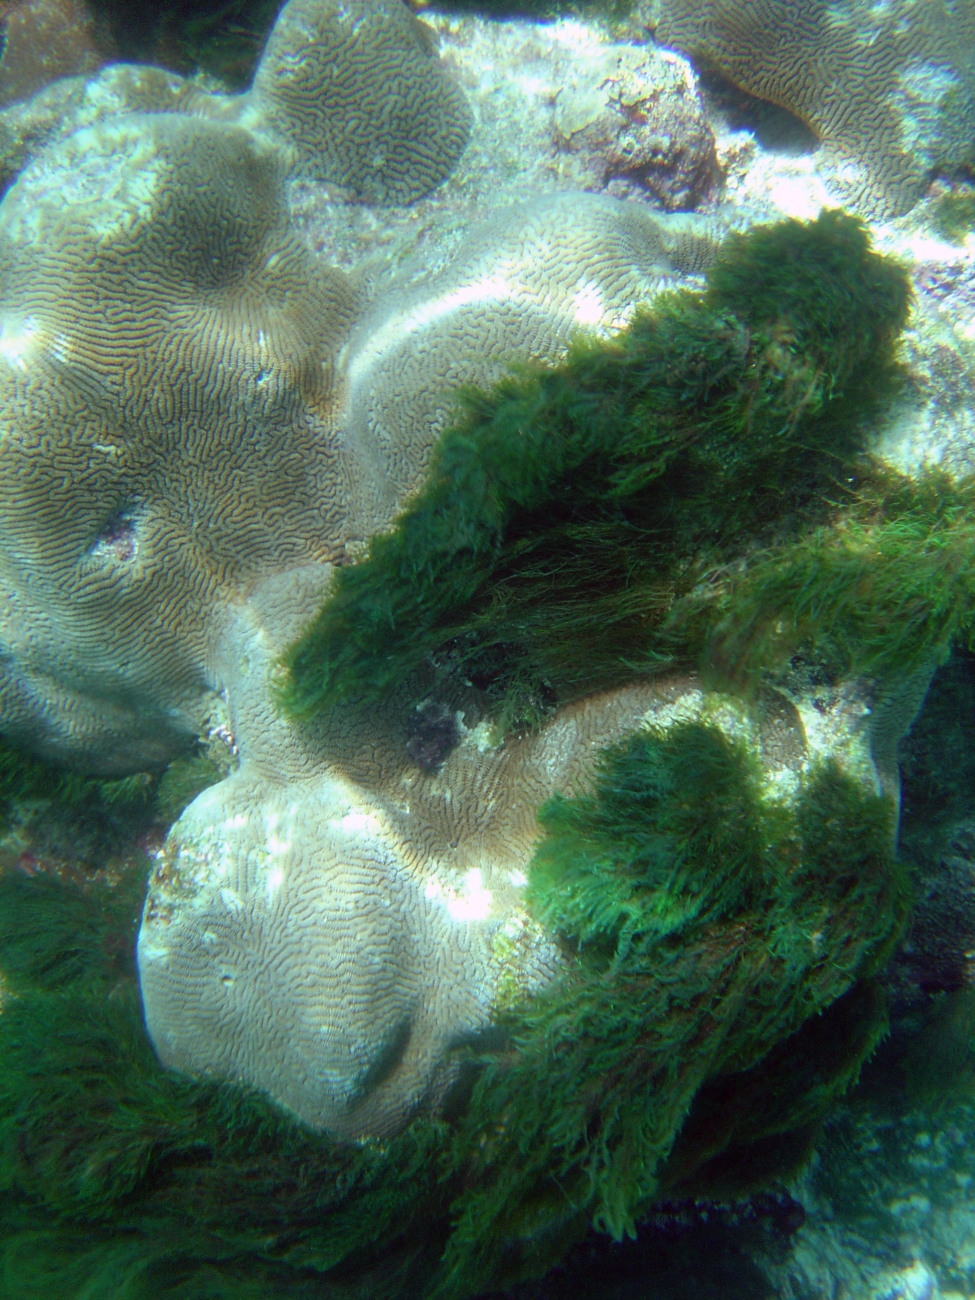 Thick green algae overgrowing coral